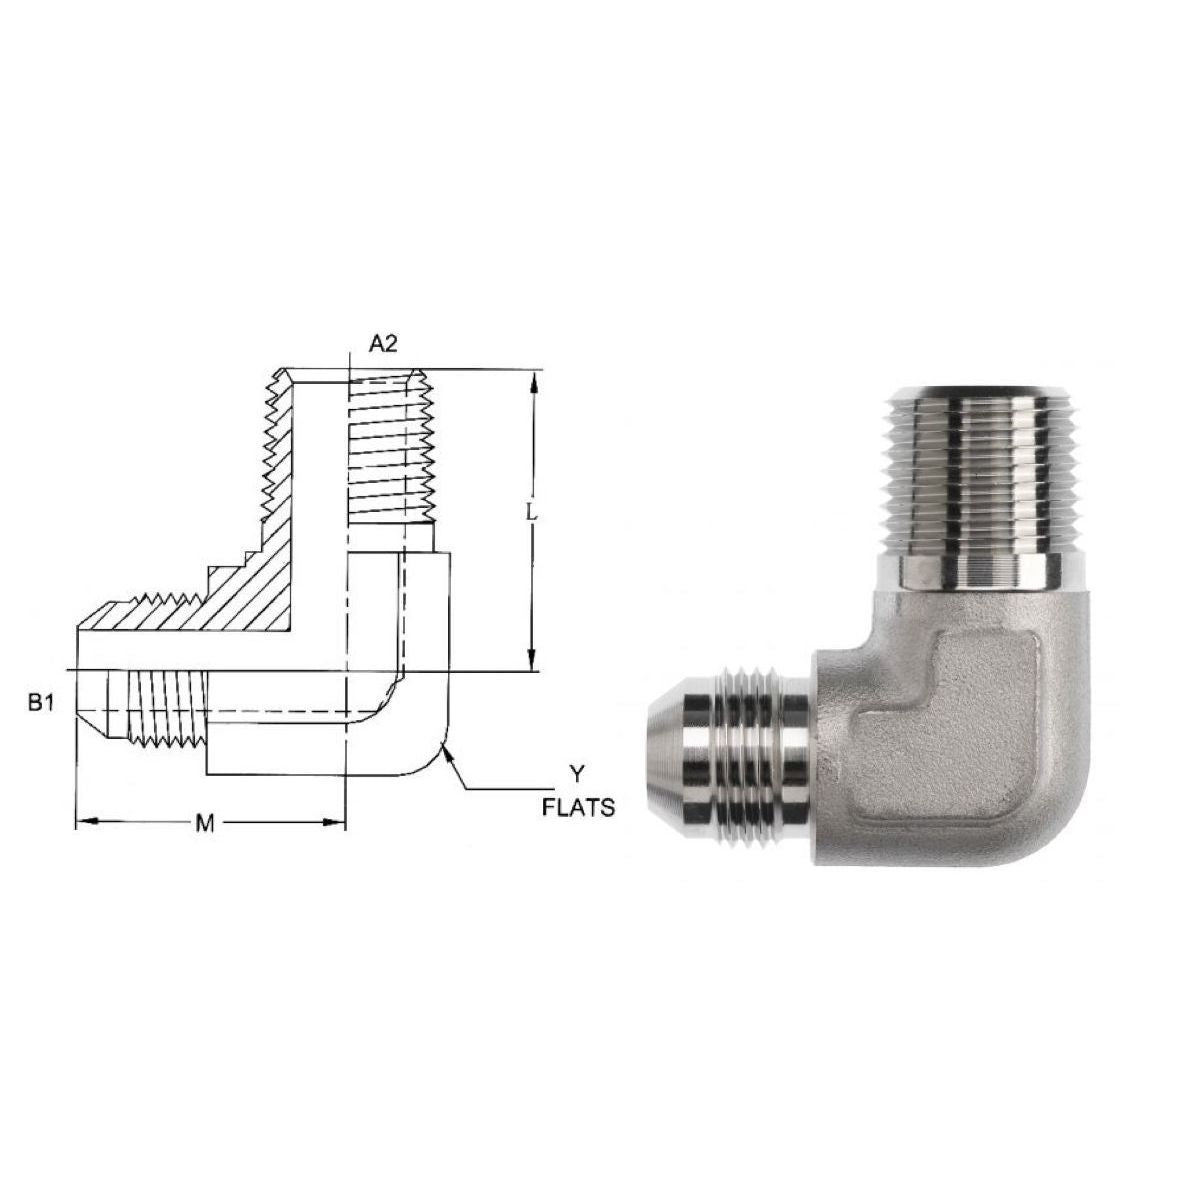 2501-04-08-SS : OneHydraulics 90-Degree Elbow, 0.25 (1/4) Male JIC x 0.5 (1/2) Male NPT, Stainless Steel, 7200psi